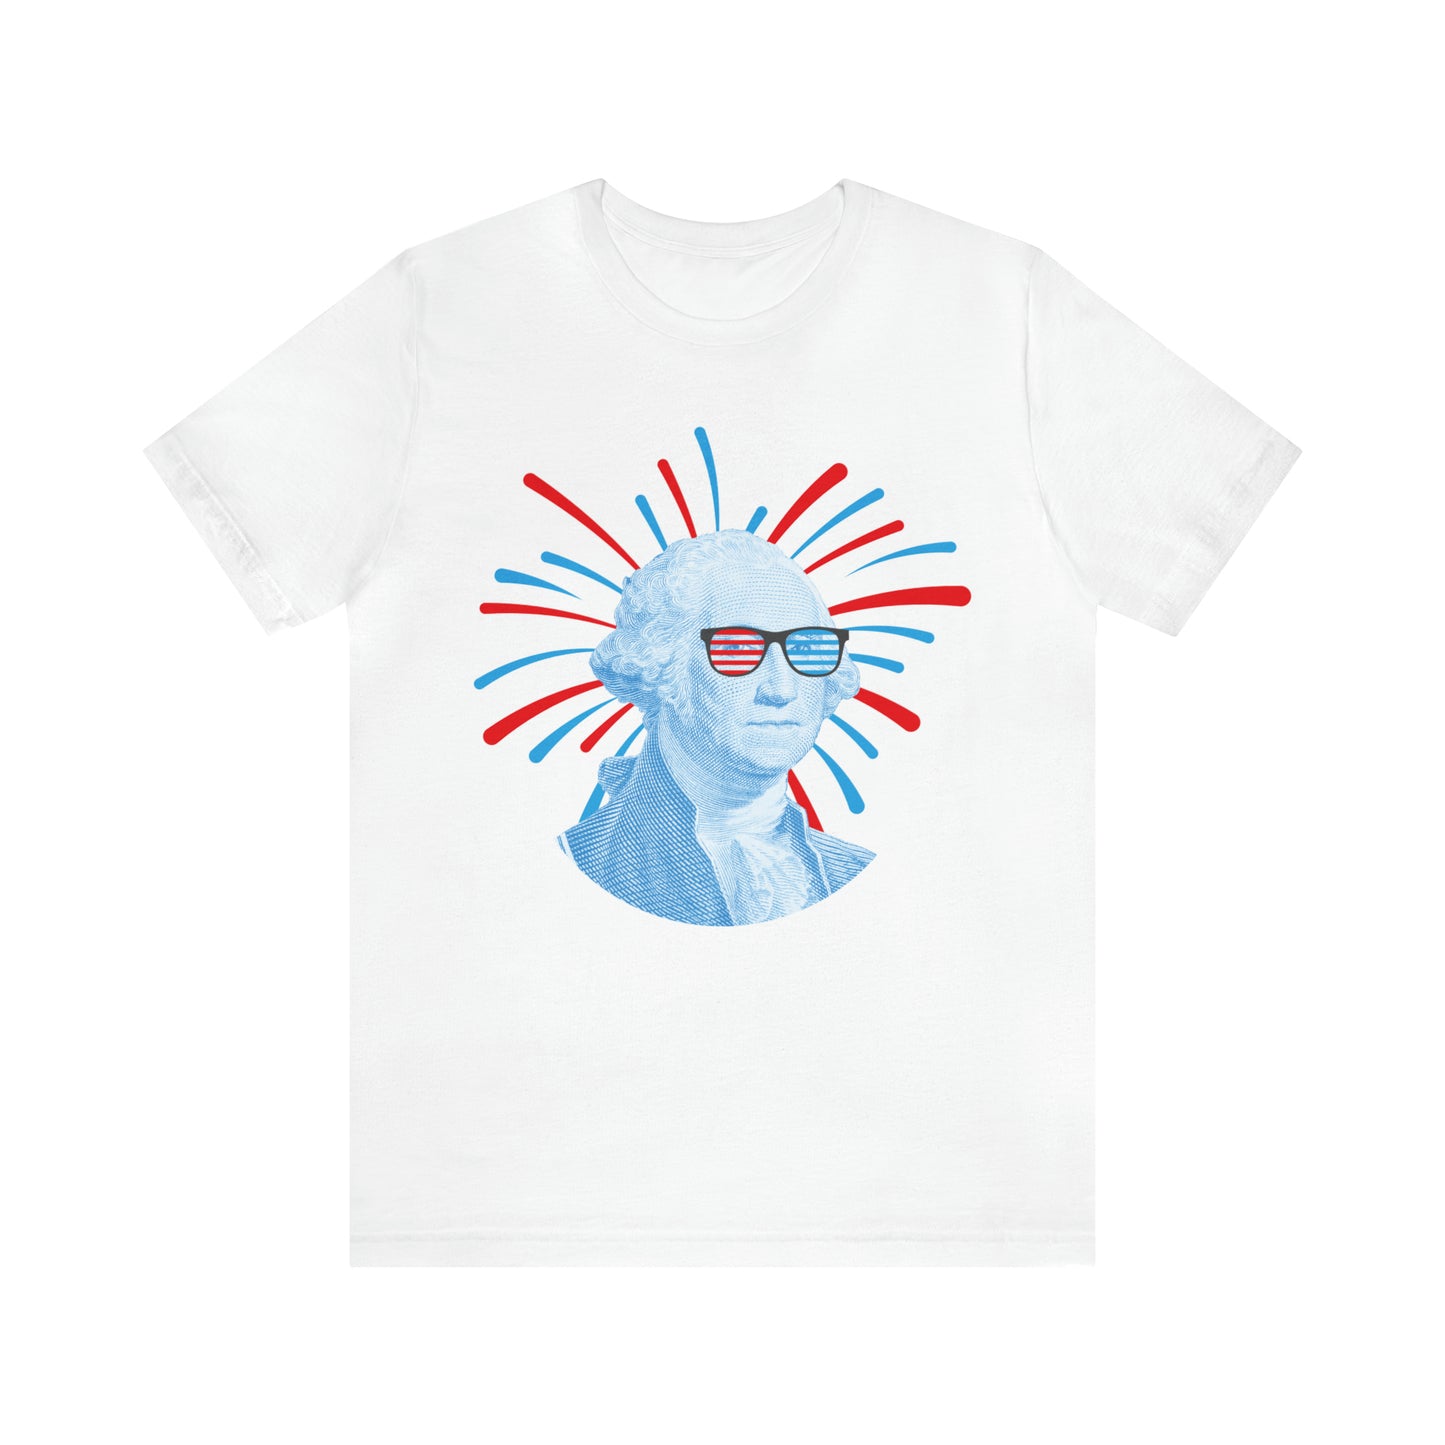 Patriotic American USA George Washington Graphic On Short Sleeve Cotton Unisex T-shirt Fourth of July Father's Day Veterans